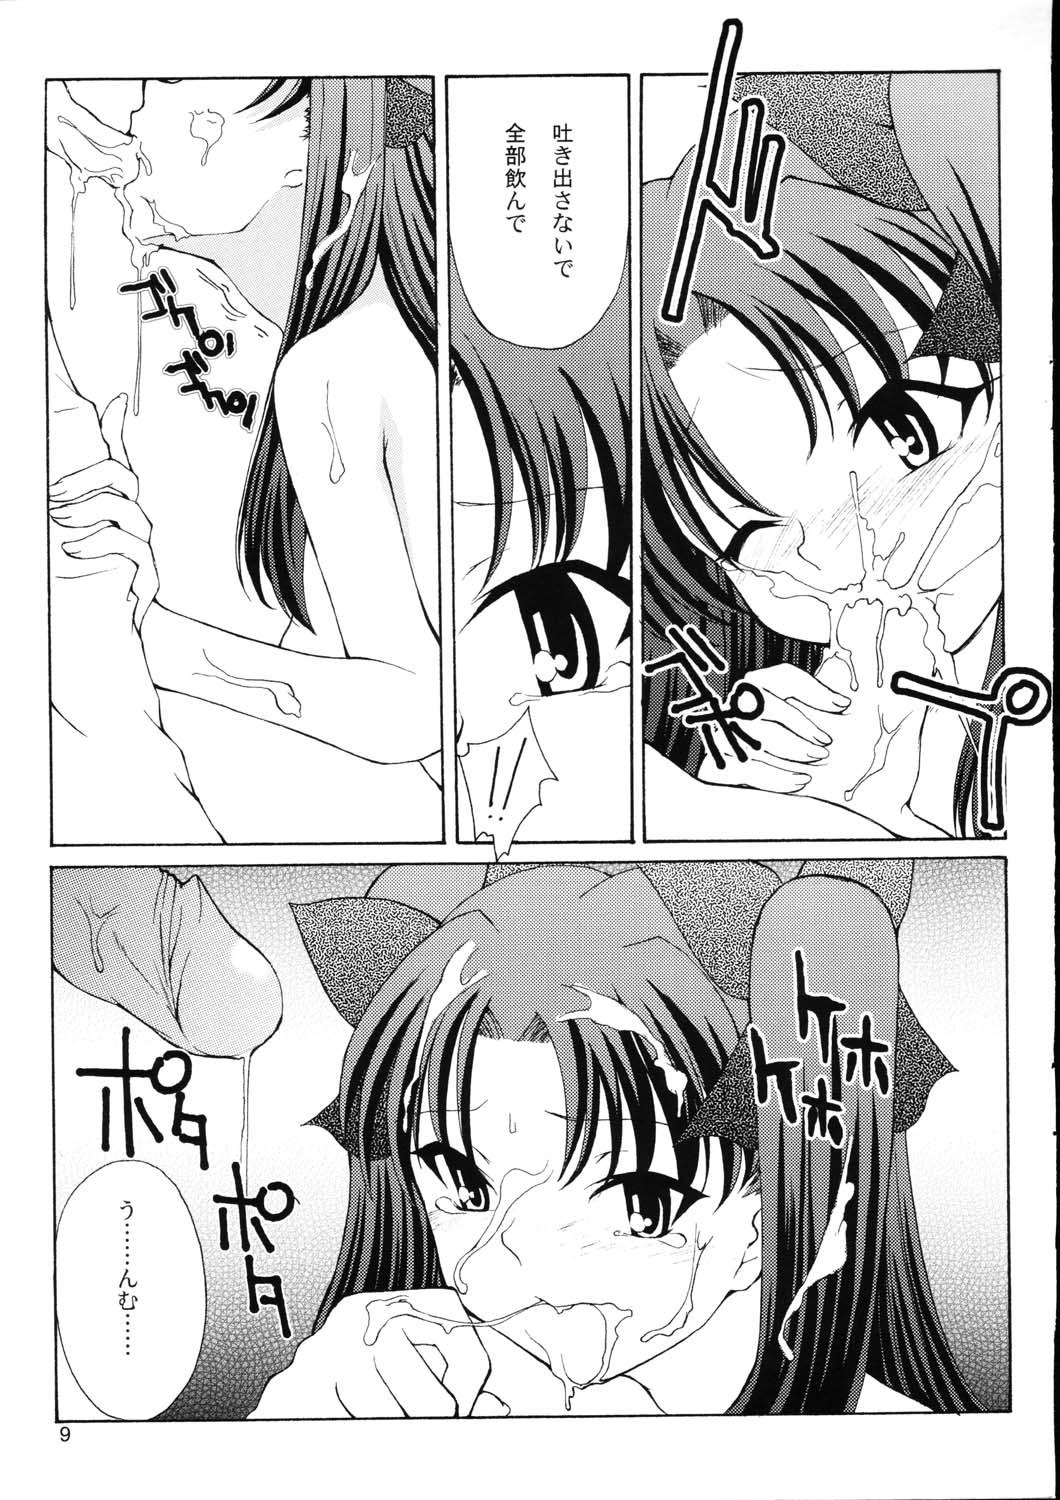 Glam Previous Night - Fate stay night 4some - Page 8